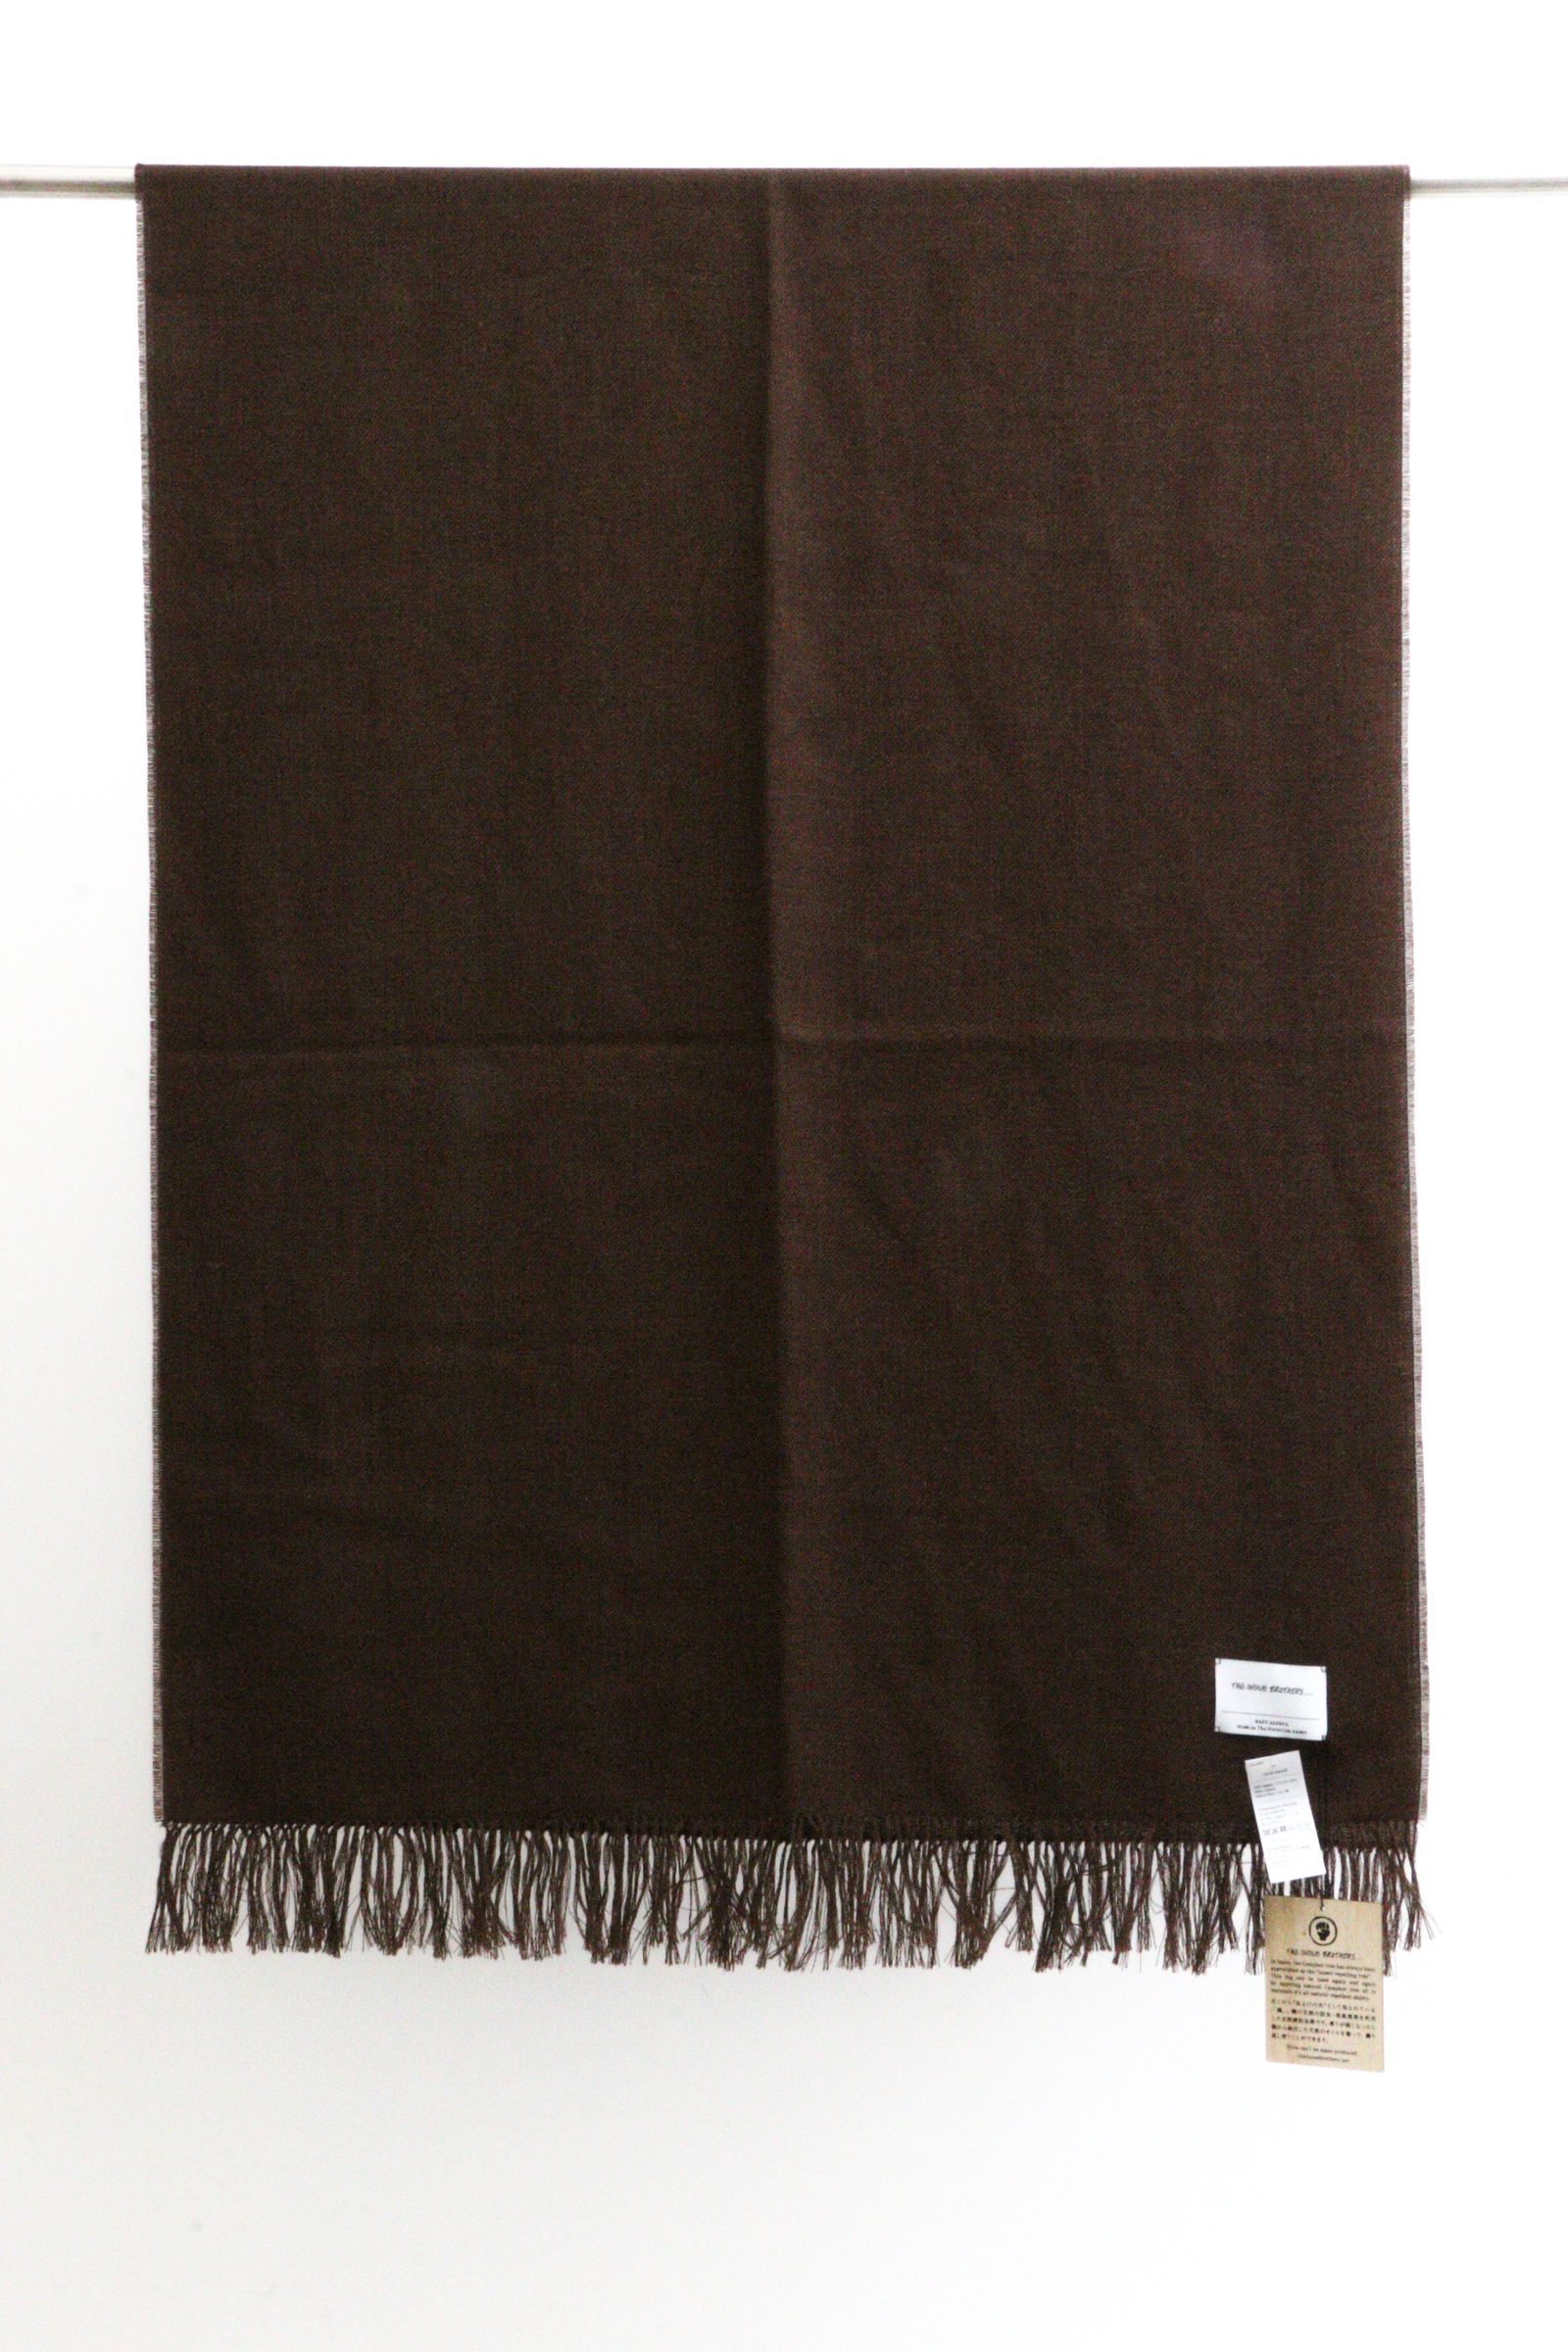 THE INOUE BROTHERS - Non Brushed Large Stole Brown / 大判 